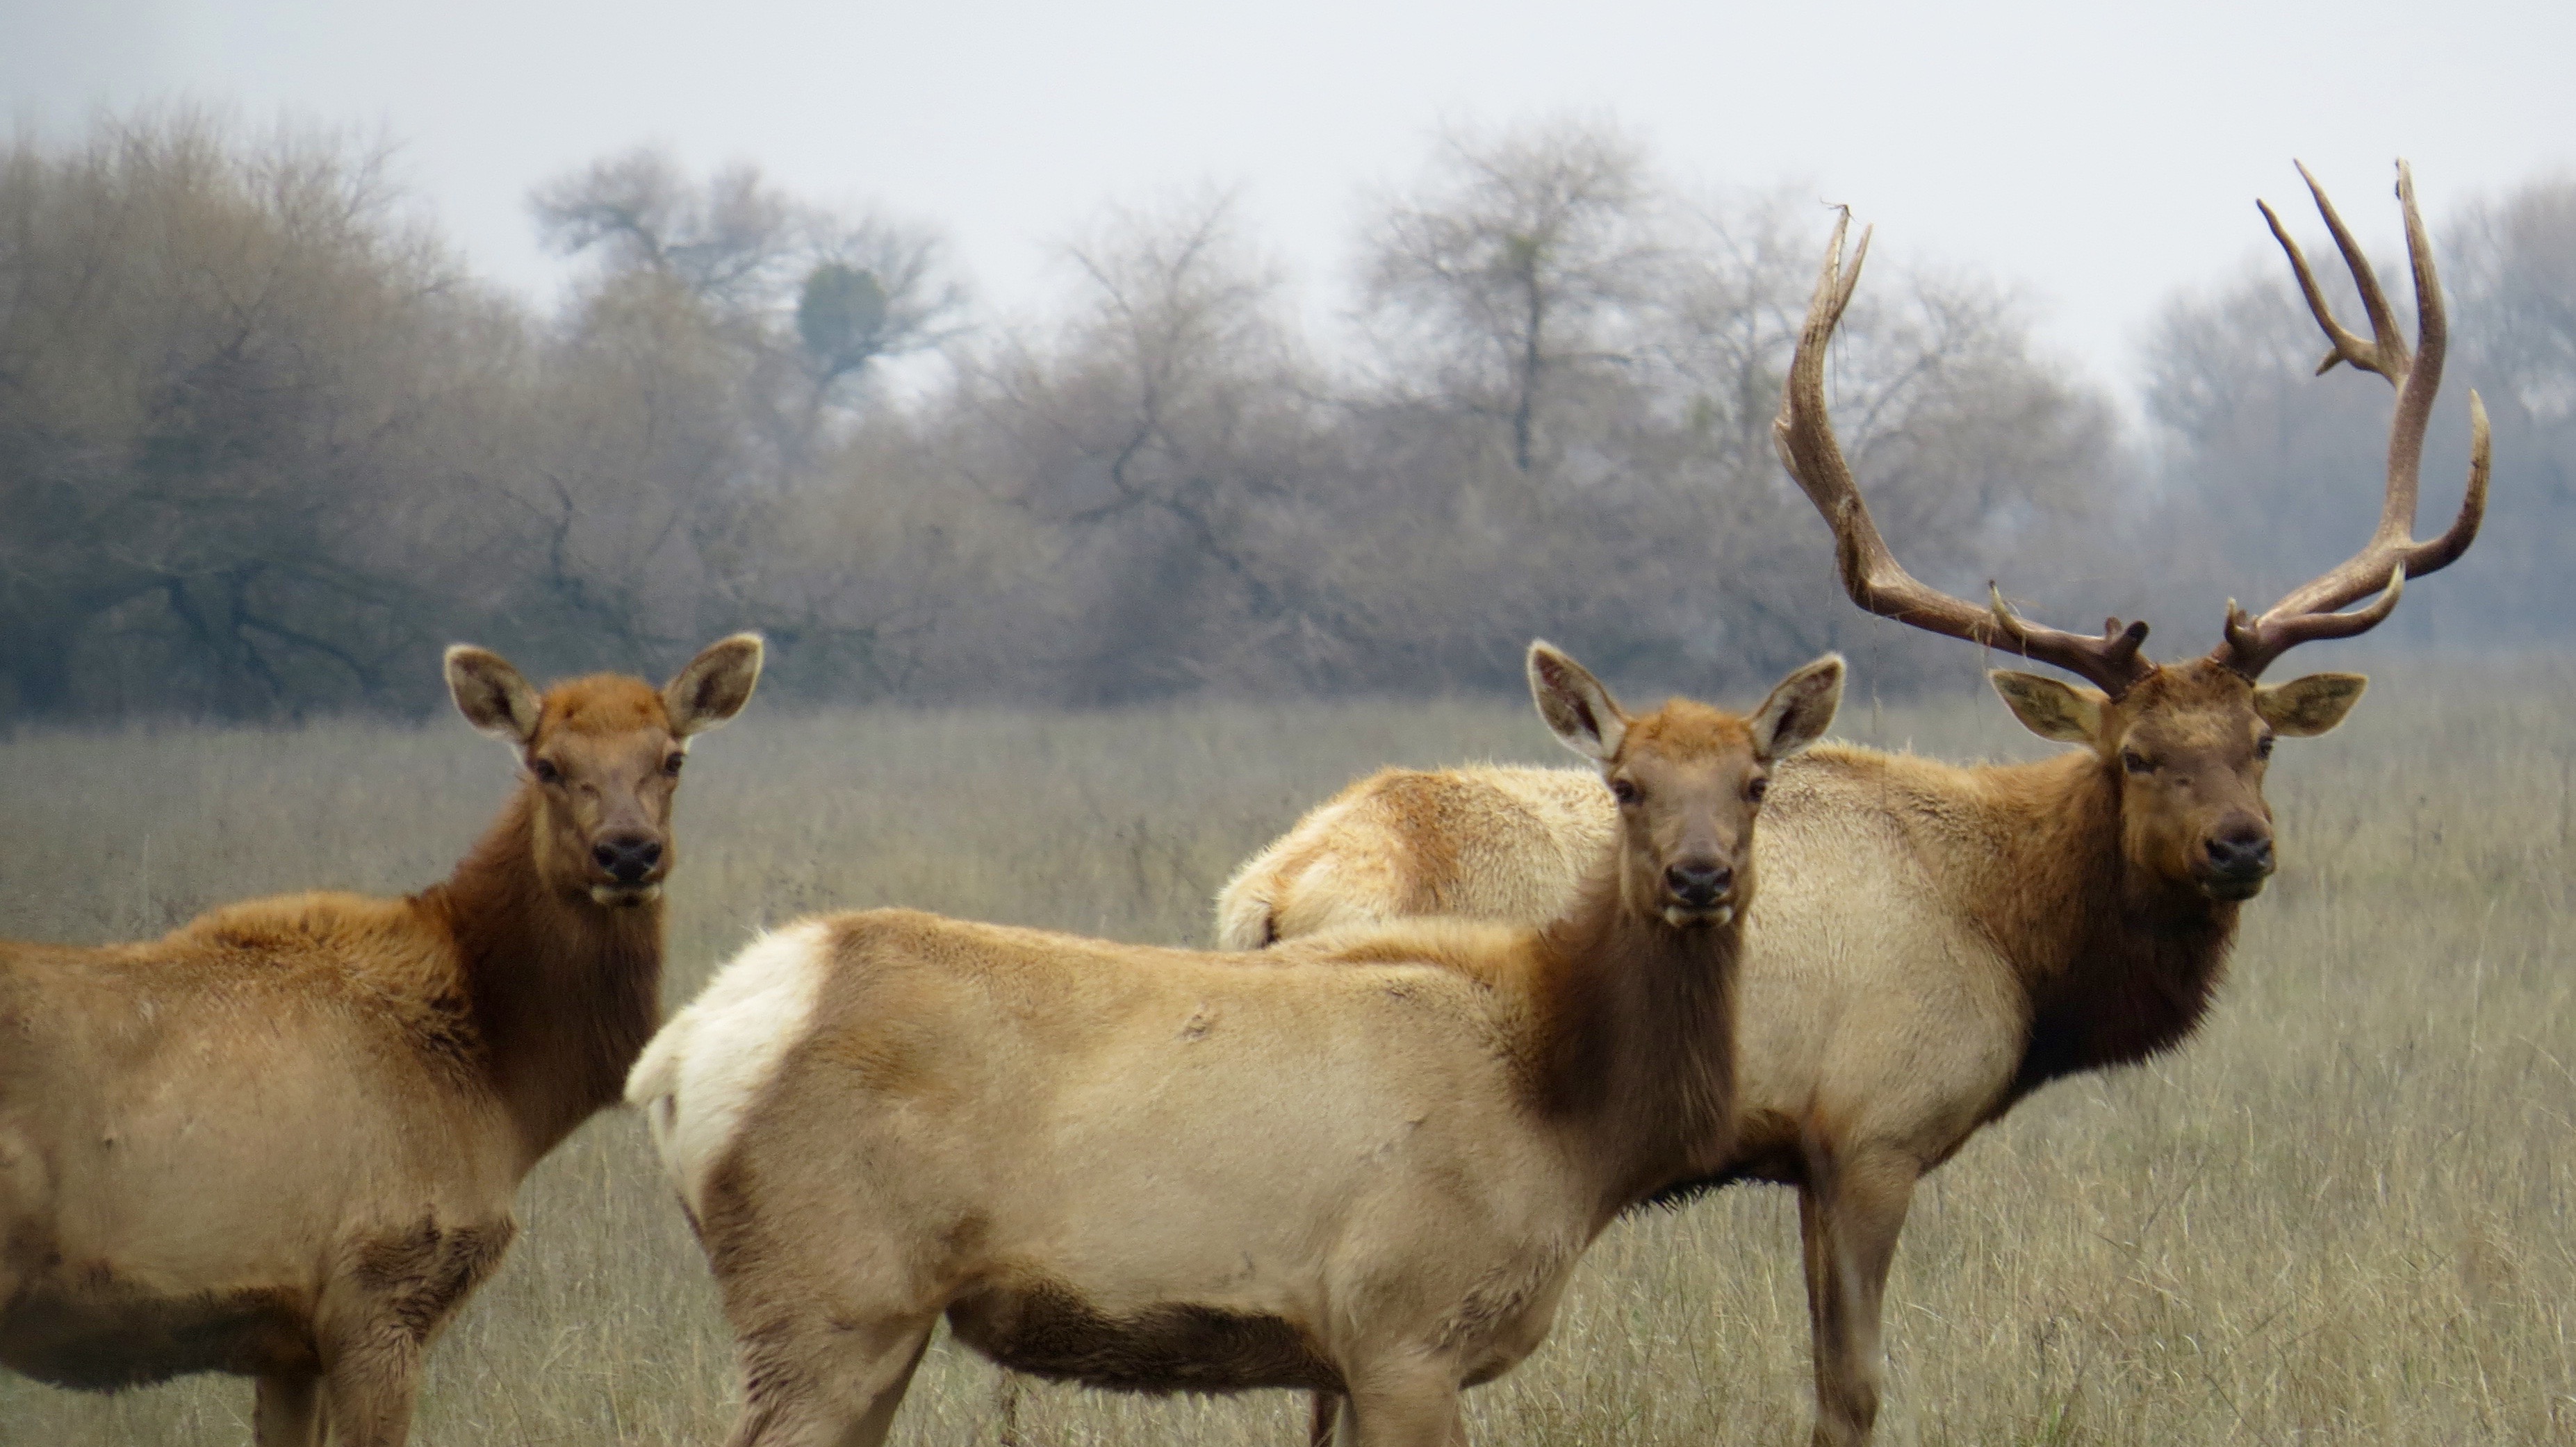 The Tule Elk, a non-migratory elk found only in California, went almost extinct in the early Seventies. Today a herd is protected, lives at the San Luis Wildlife Refuge and is thriving. 